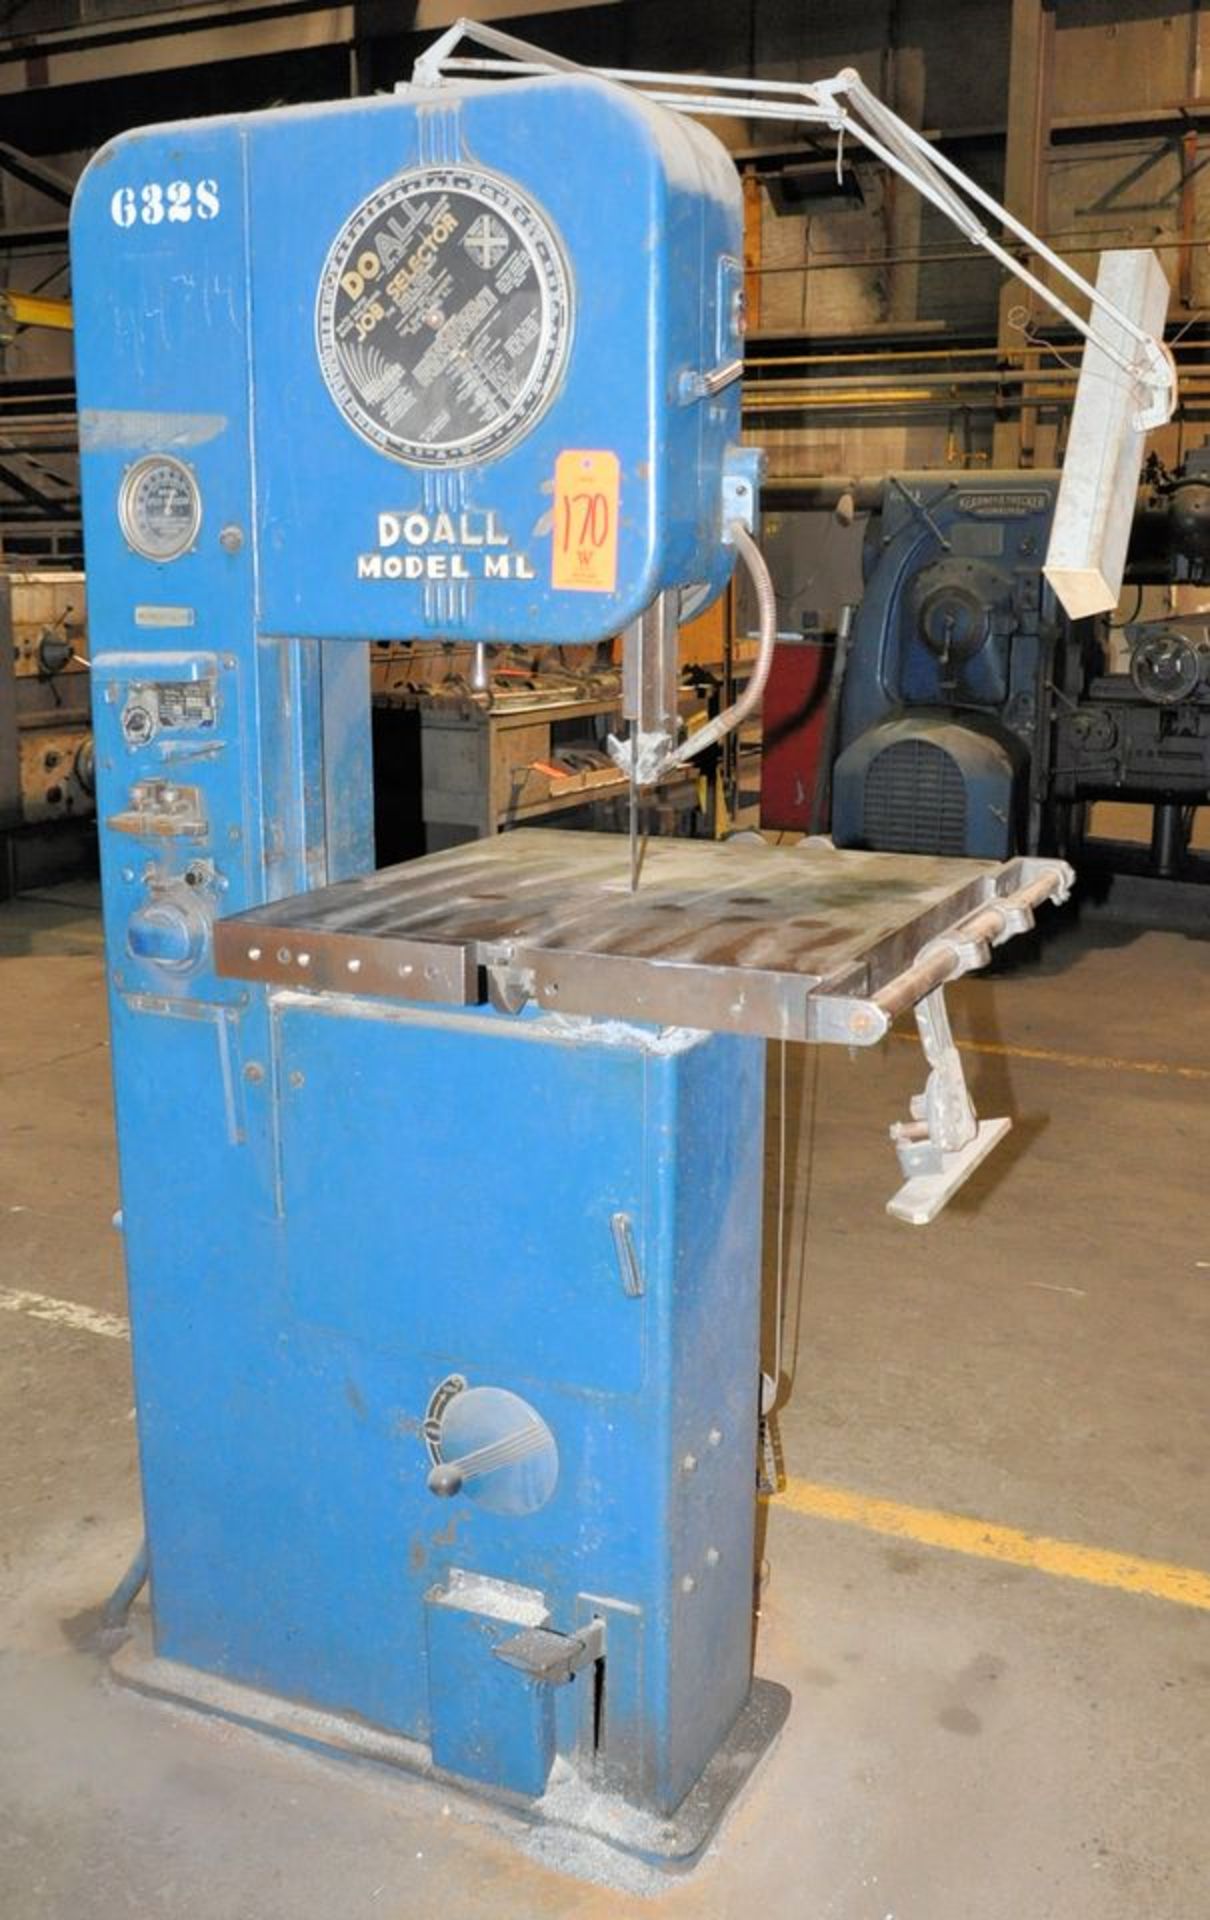 DoAll Model ML, 16" Vertical Contour Metal Cutting Band Saw, S/n 4611530, 24" x 24" Work Surface,